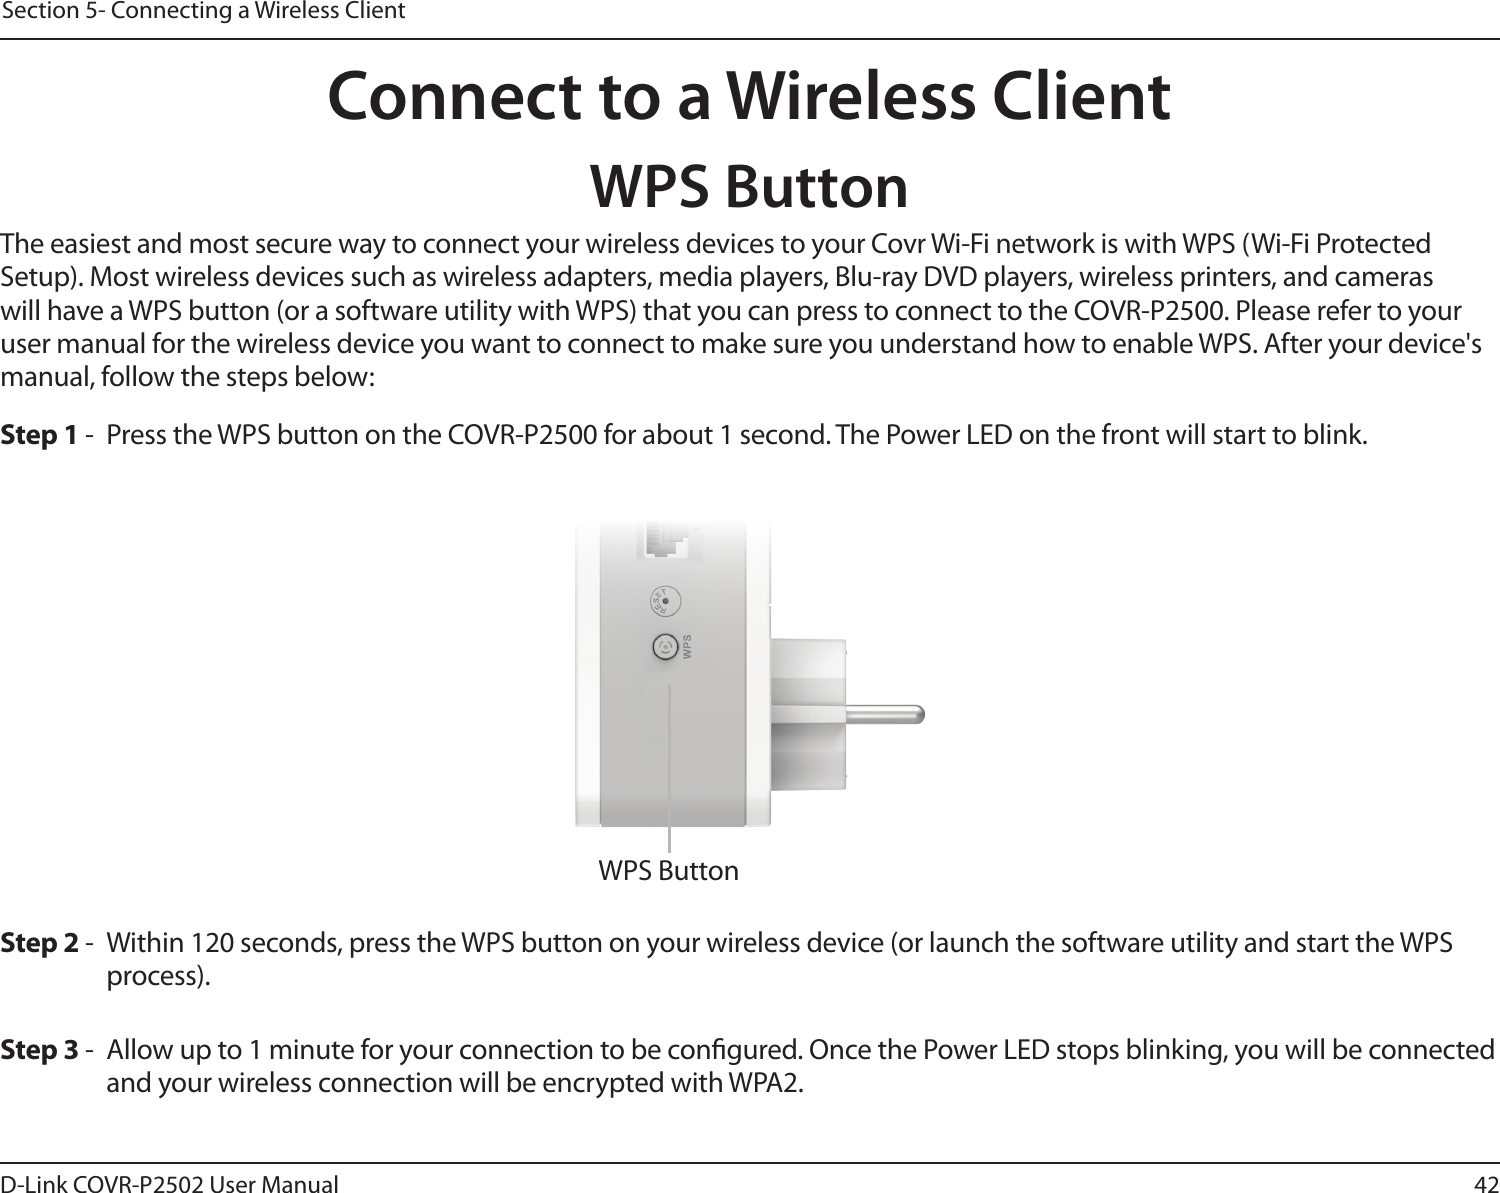 42D-Link COVR-P2502 User ManualSection 5- Connecting a Wireless ClientConnect to a Wireless ClientWPS ButtonStep 2 -  Within 120 seconds, press the WPS button on your wireless device (or launch the software utility and start the WPS process).The easiest and most secure way to connect your wireless devices to your Covr Wi-Fi network is with WPS (Wi-Fi Protected Setup). Most wireless devices such as wireless adapters, media players, Blu-ray DVD players, wireless printers, and cameras will have a WPS button (or a software utility with WPS) that you can press to connect to the COVR-P2500. Please refer to your user manual for the wireless device you want to connect to make sure you understand how to enable WPS. After your device&apos;s manual, follow the steps below:Step 1 -  Press the WPS button on the COVR-P2500 for about 1 second. The Power LED on the front will start to blink.Step 3 -  Allow up to 1 minute for your connection to be congured. Once the Power LED stops blinking, you will be connected and your wireless connection will be encrypted with WPA2.WPS Button